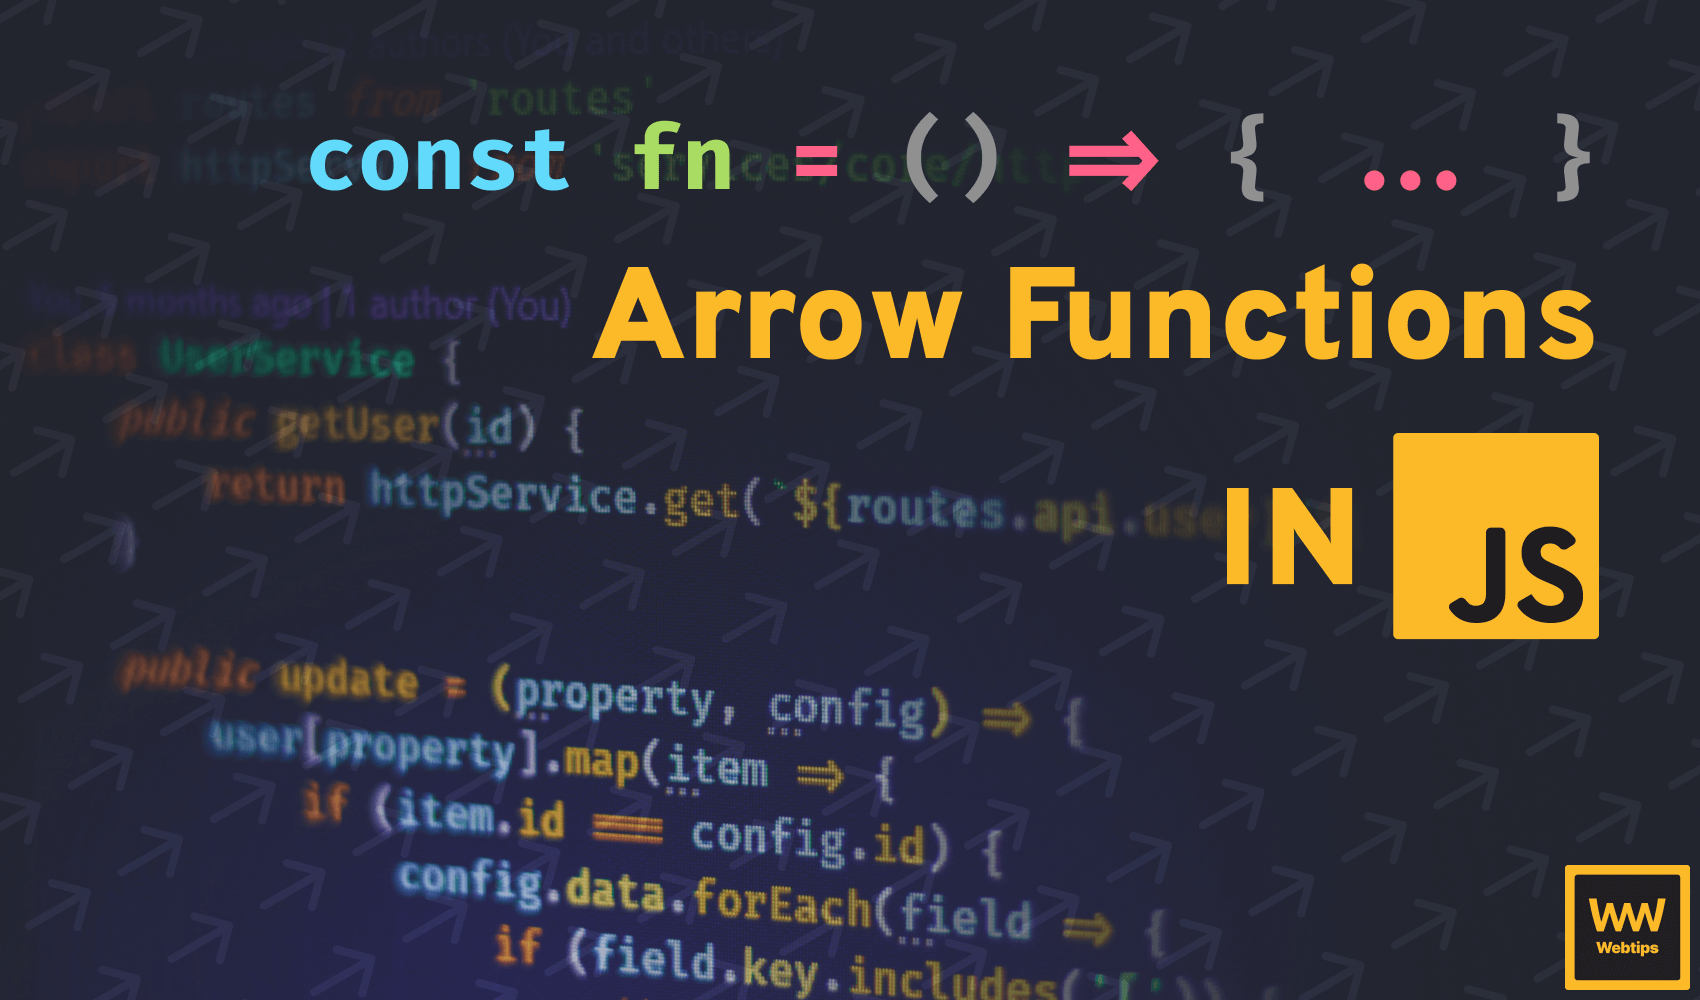 What are Arrow Functions in JavaScript?